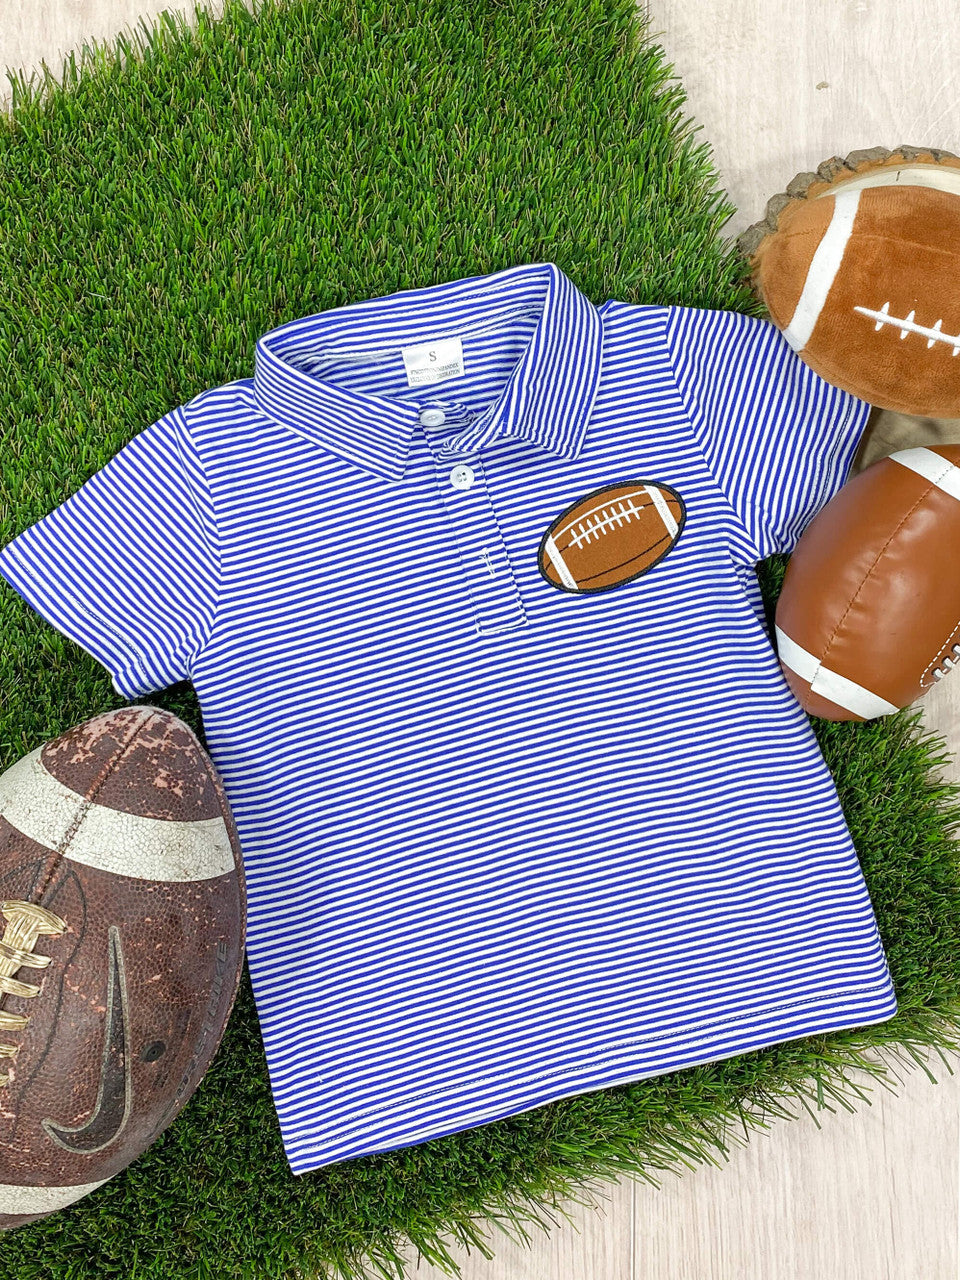 Blue and white striped collared shirt with small football applique design